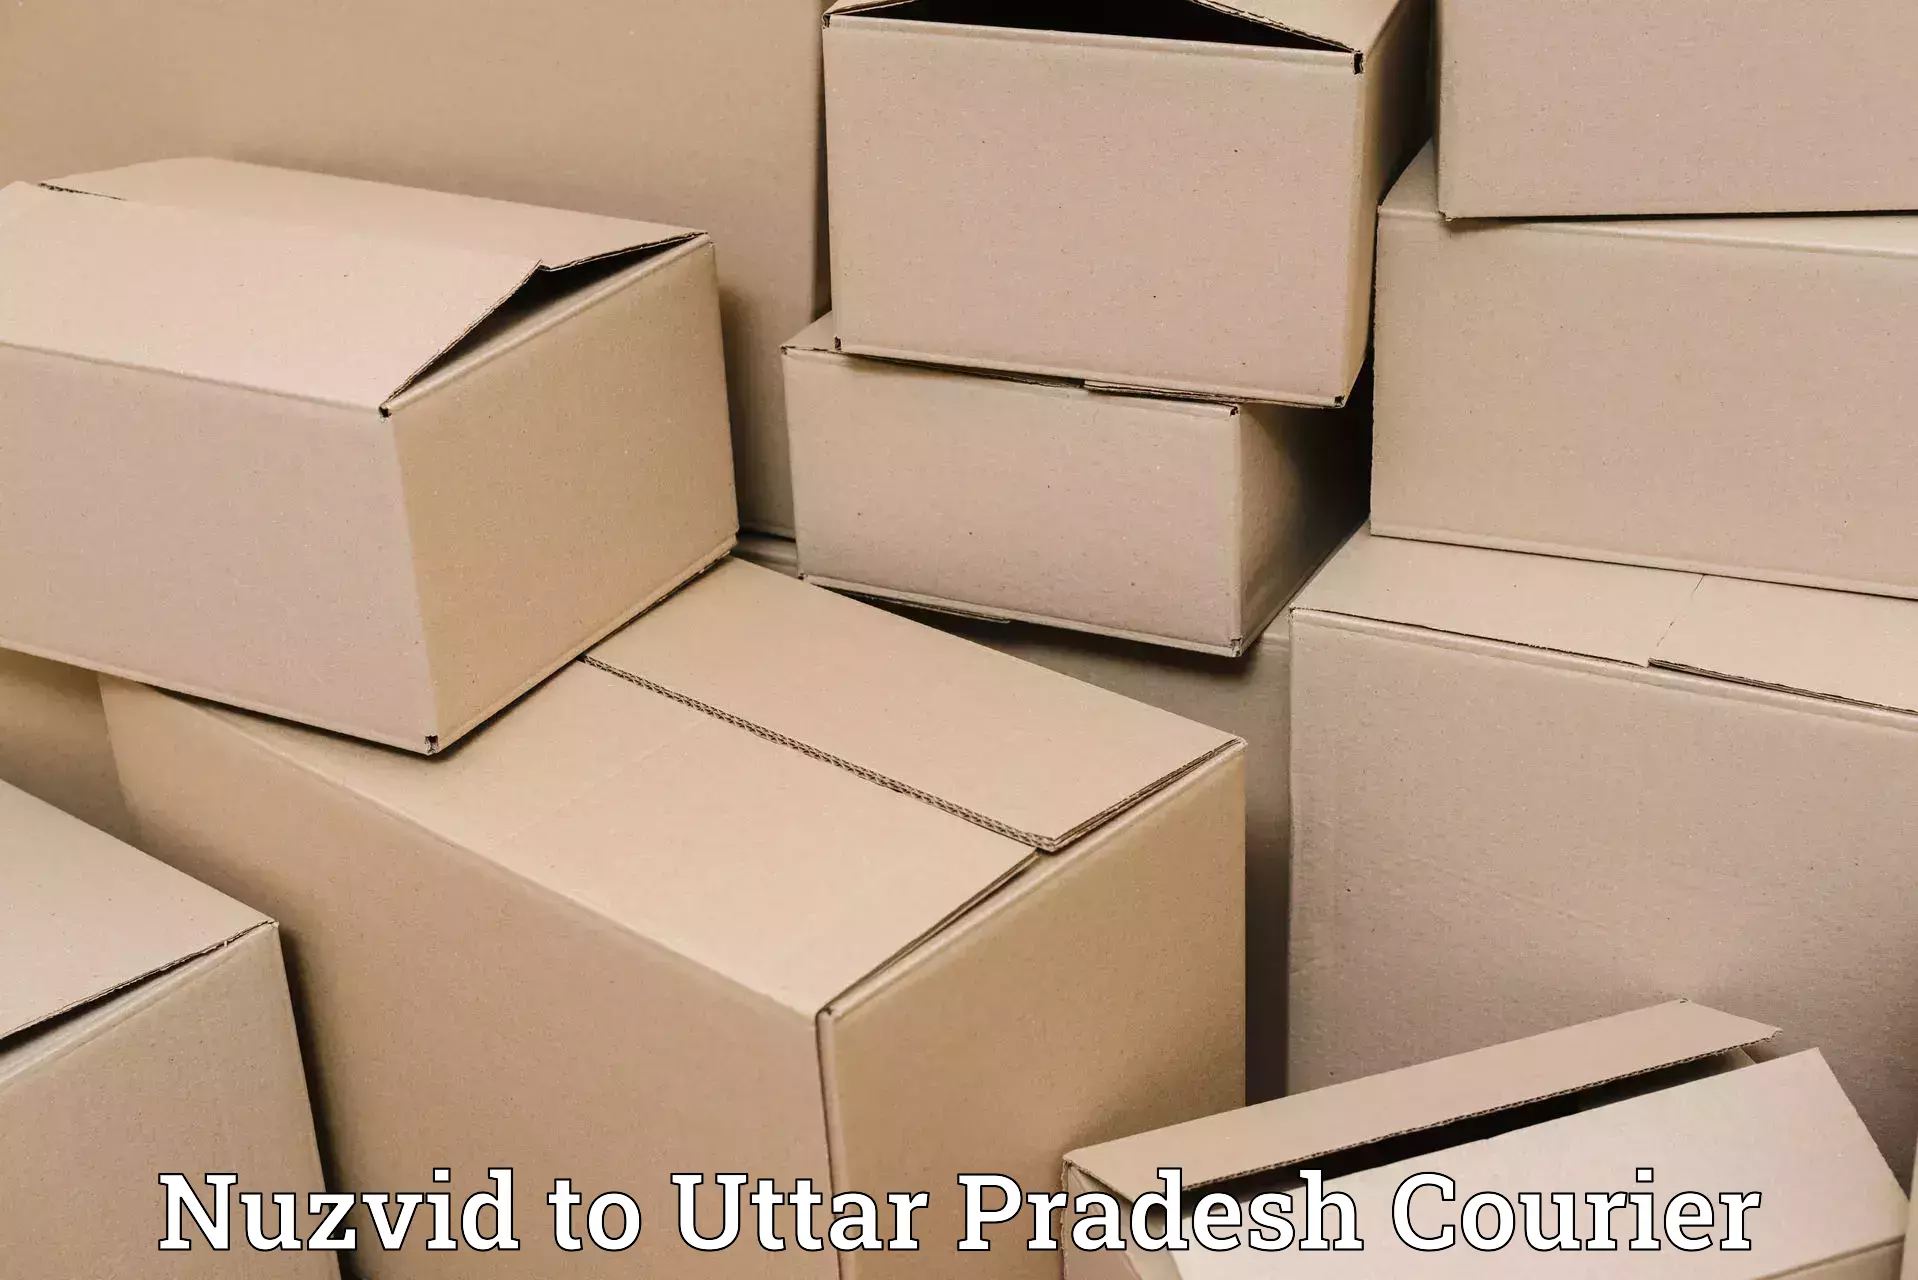 Large package courier Nuzvid to Gola